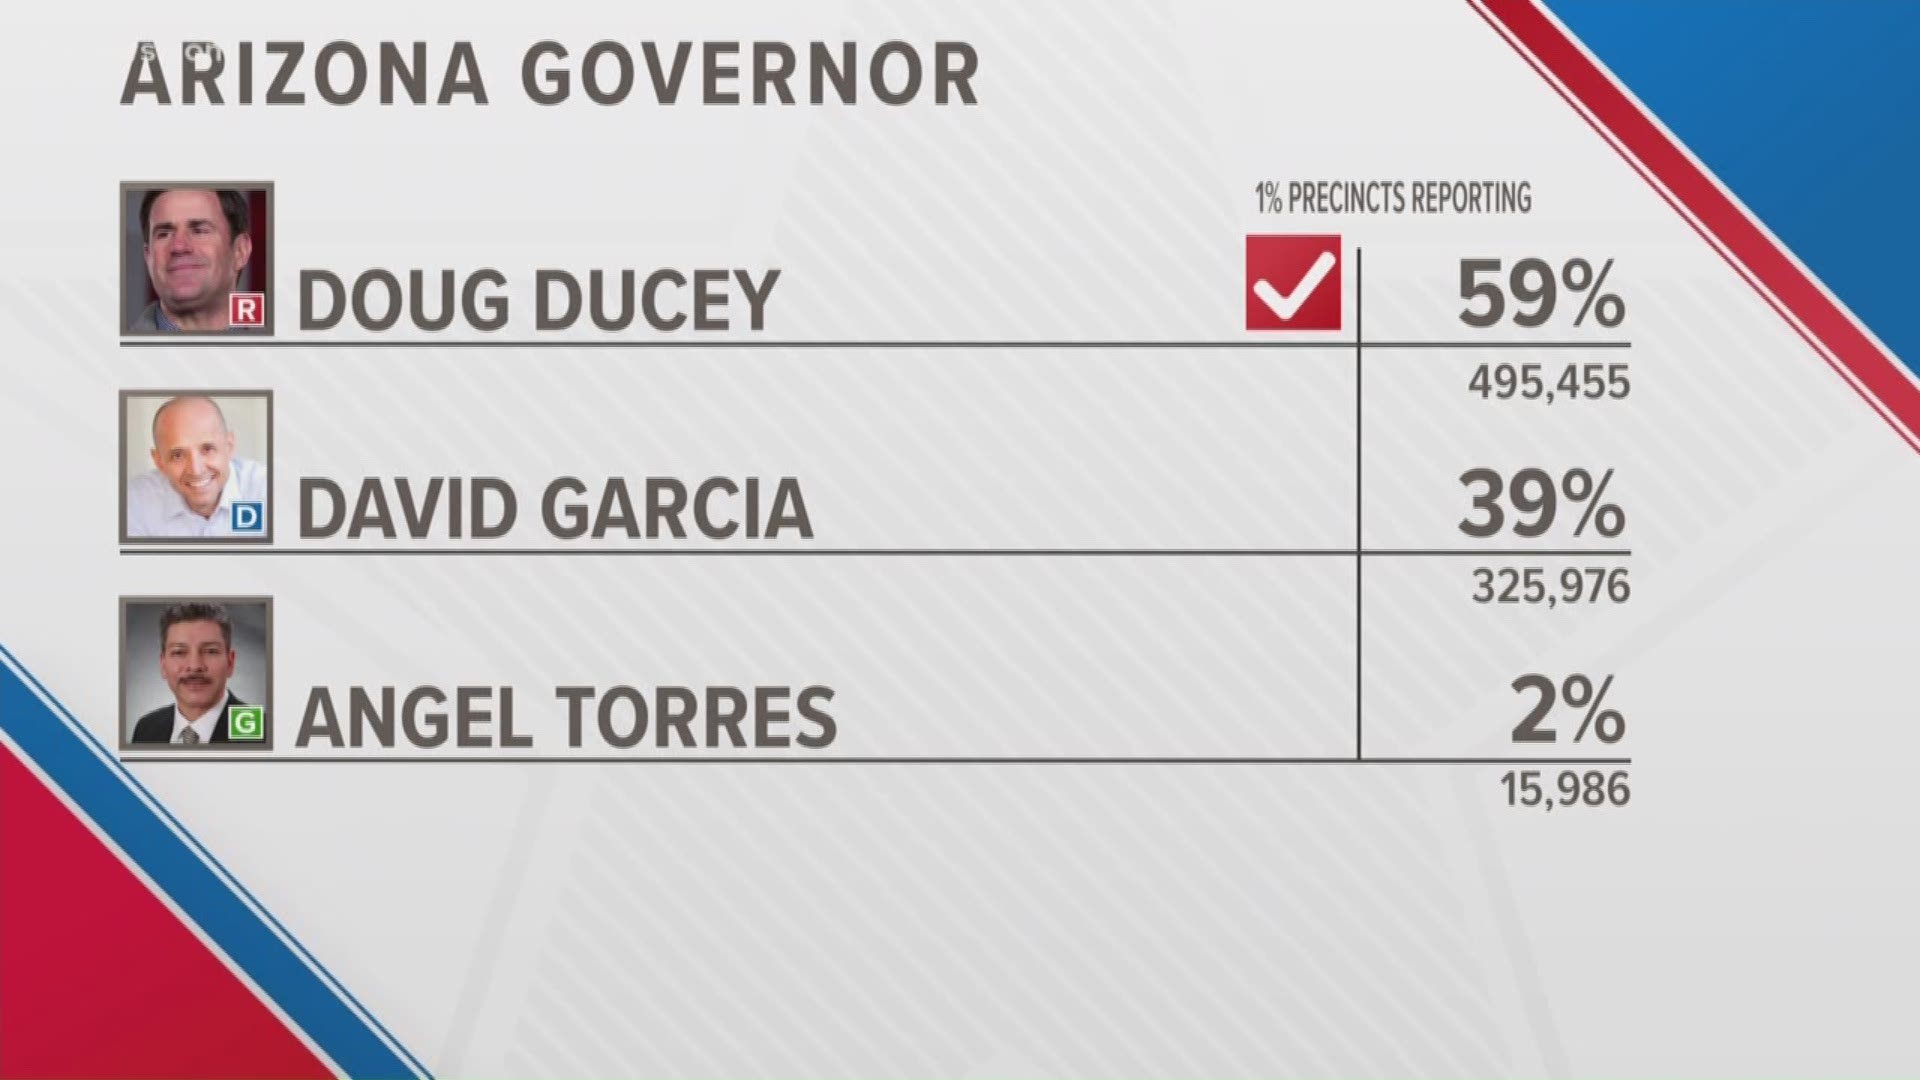 NBC News has called the Arizona Governors race for Doug Ducey. Results are from the Arizona Secretary of State's office.